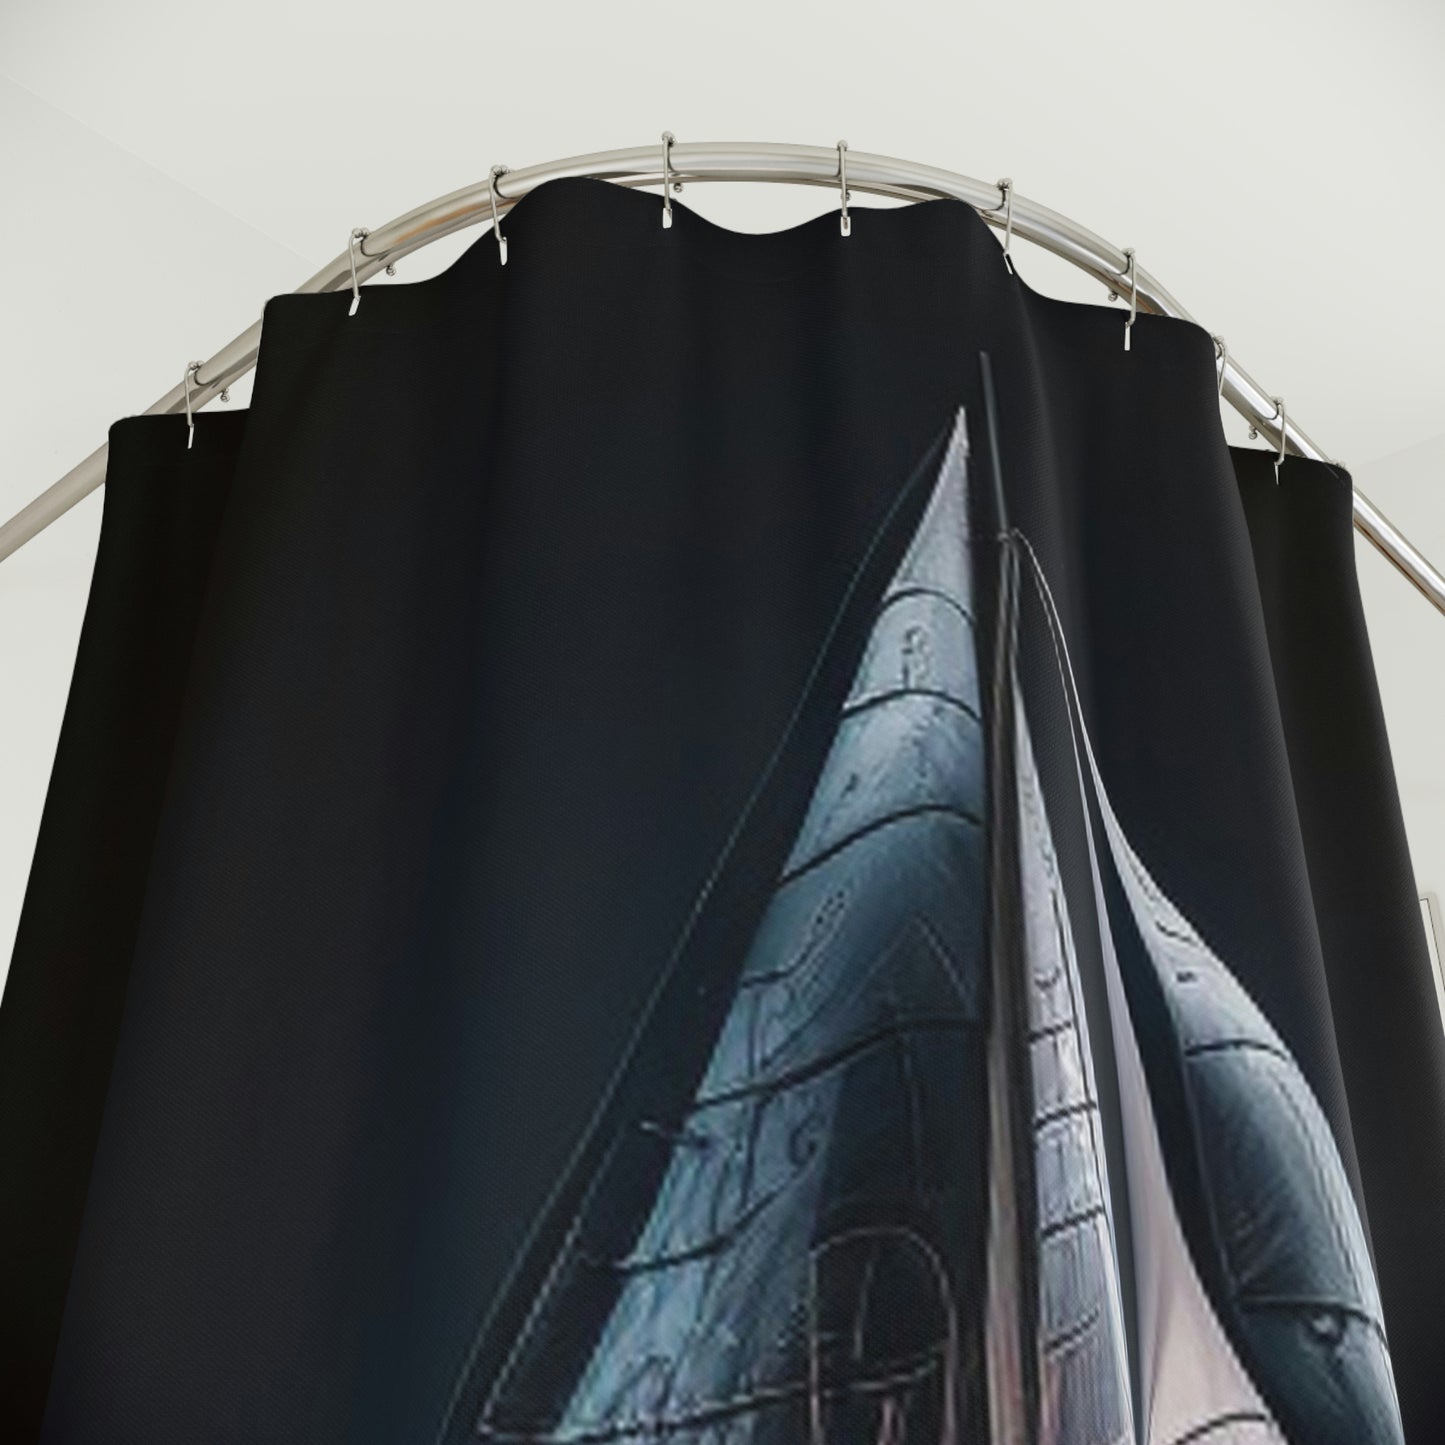 Polyester Shower Curtain glow sailboat 2